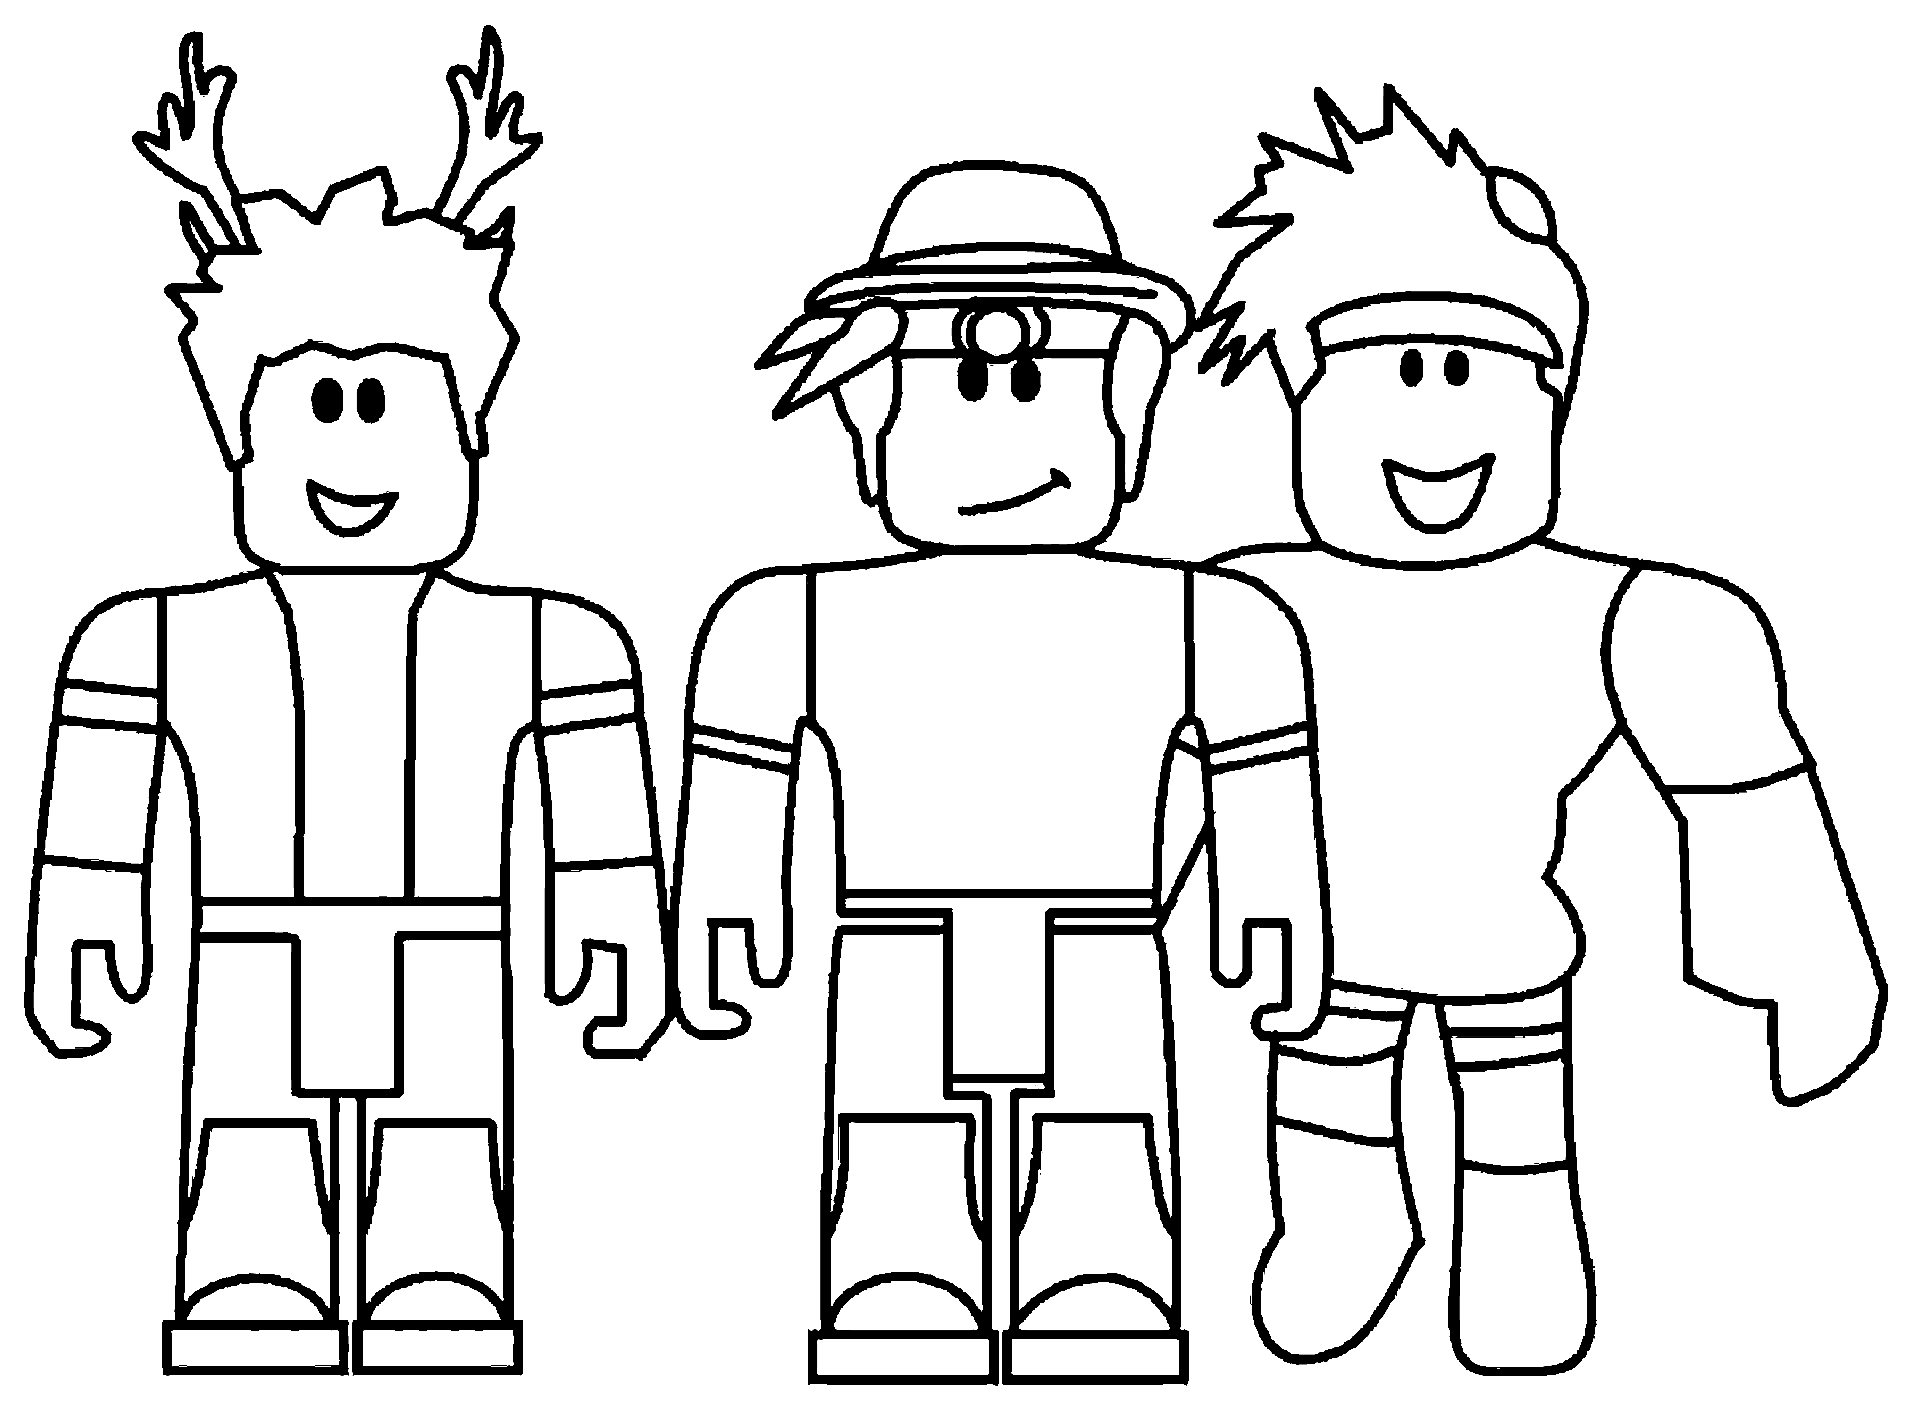 Roblox characters smiling Coloring Pages - Roblox Coloring Pages - Coloring  Pages For Kids And Adults